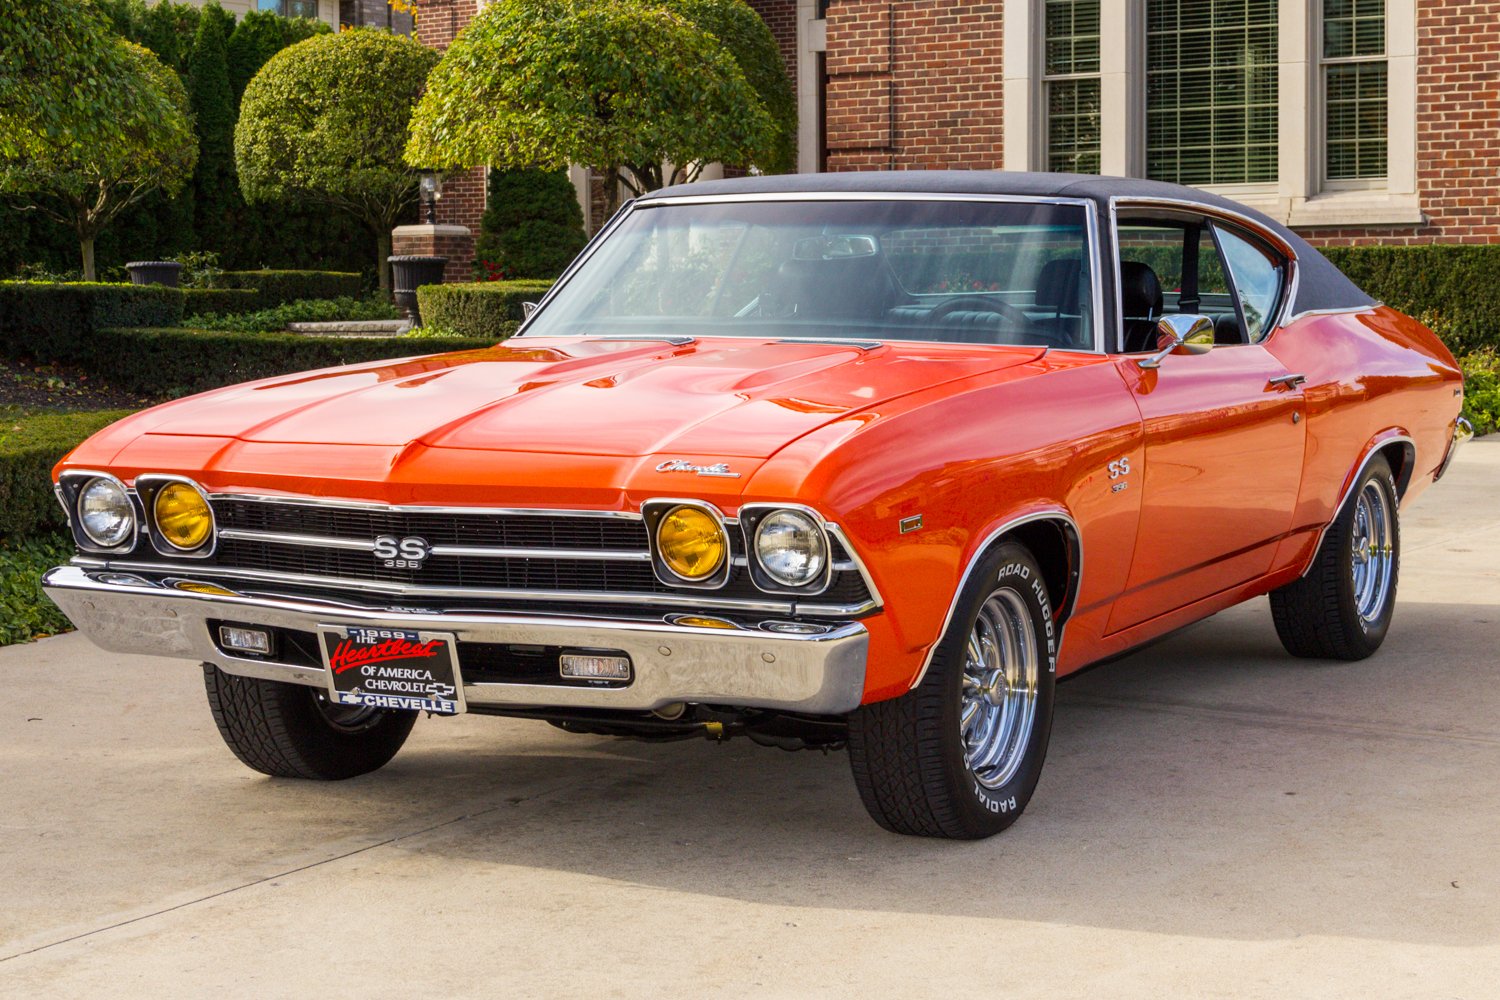 1969 Chevrolet Chevelle | Classic Cars for Sale Michigan: Muscle & Old